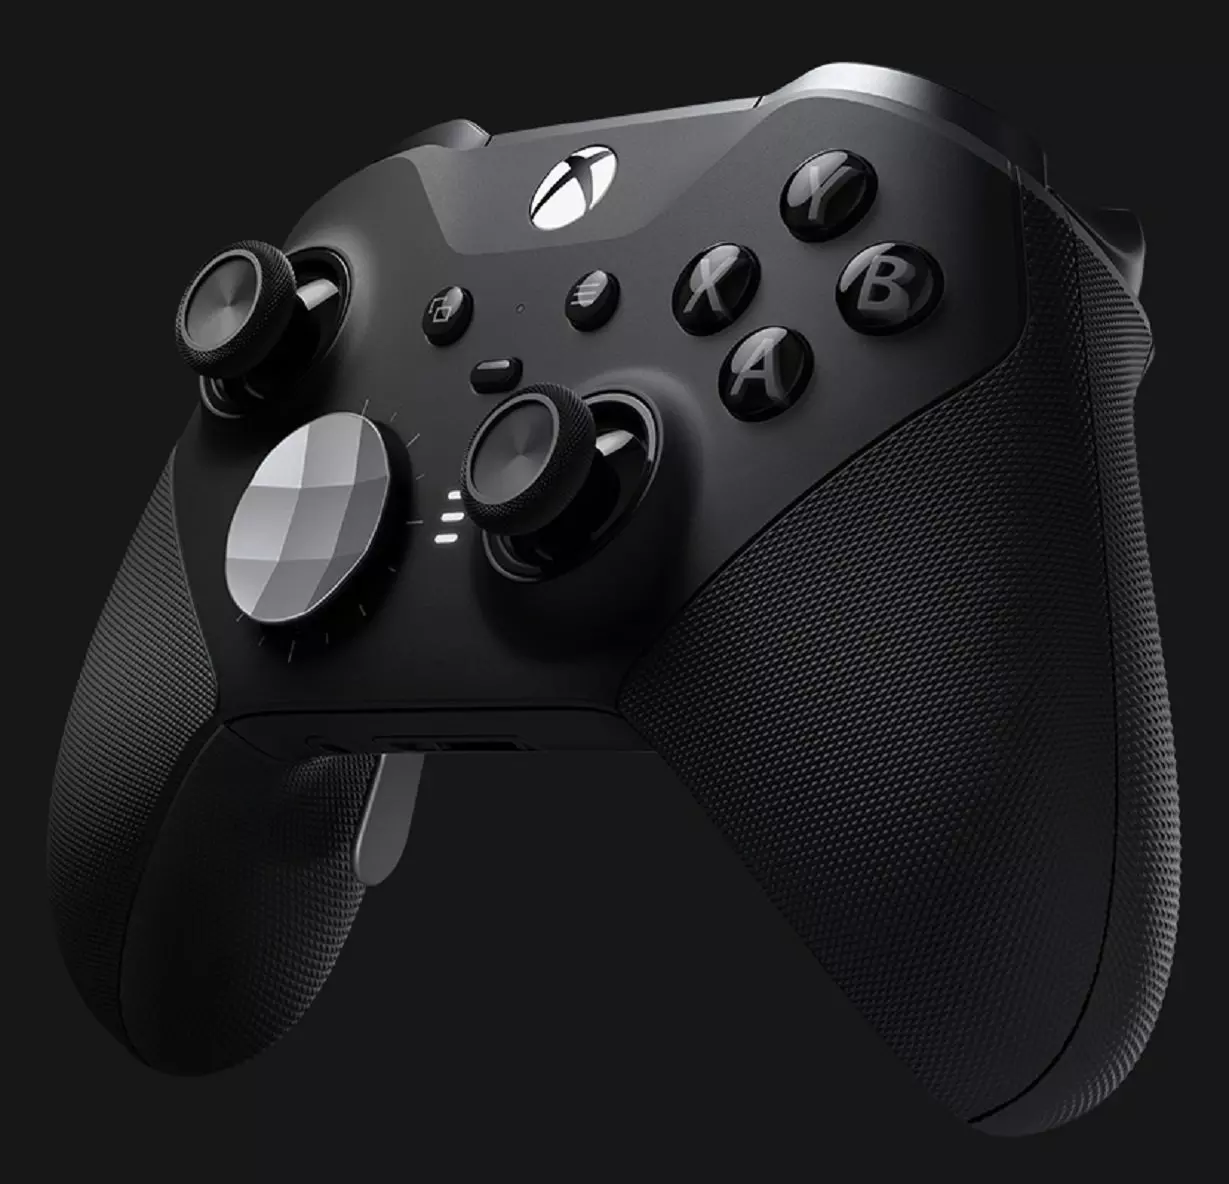 Customize with Xbox Accessories app